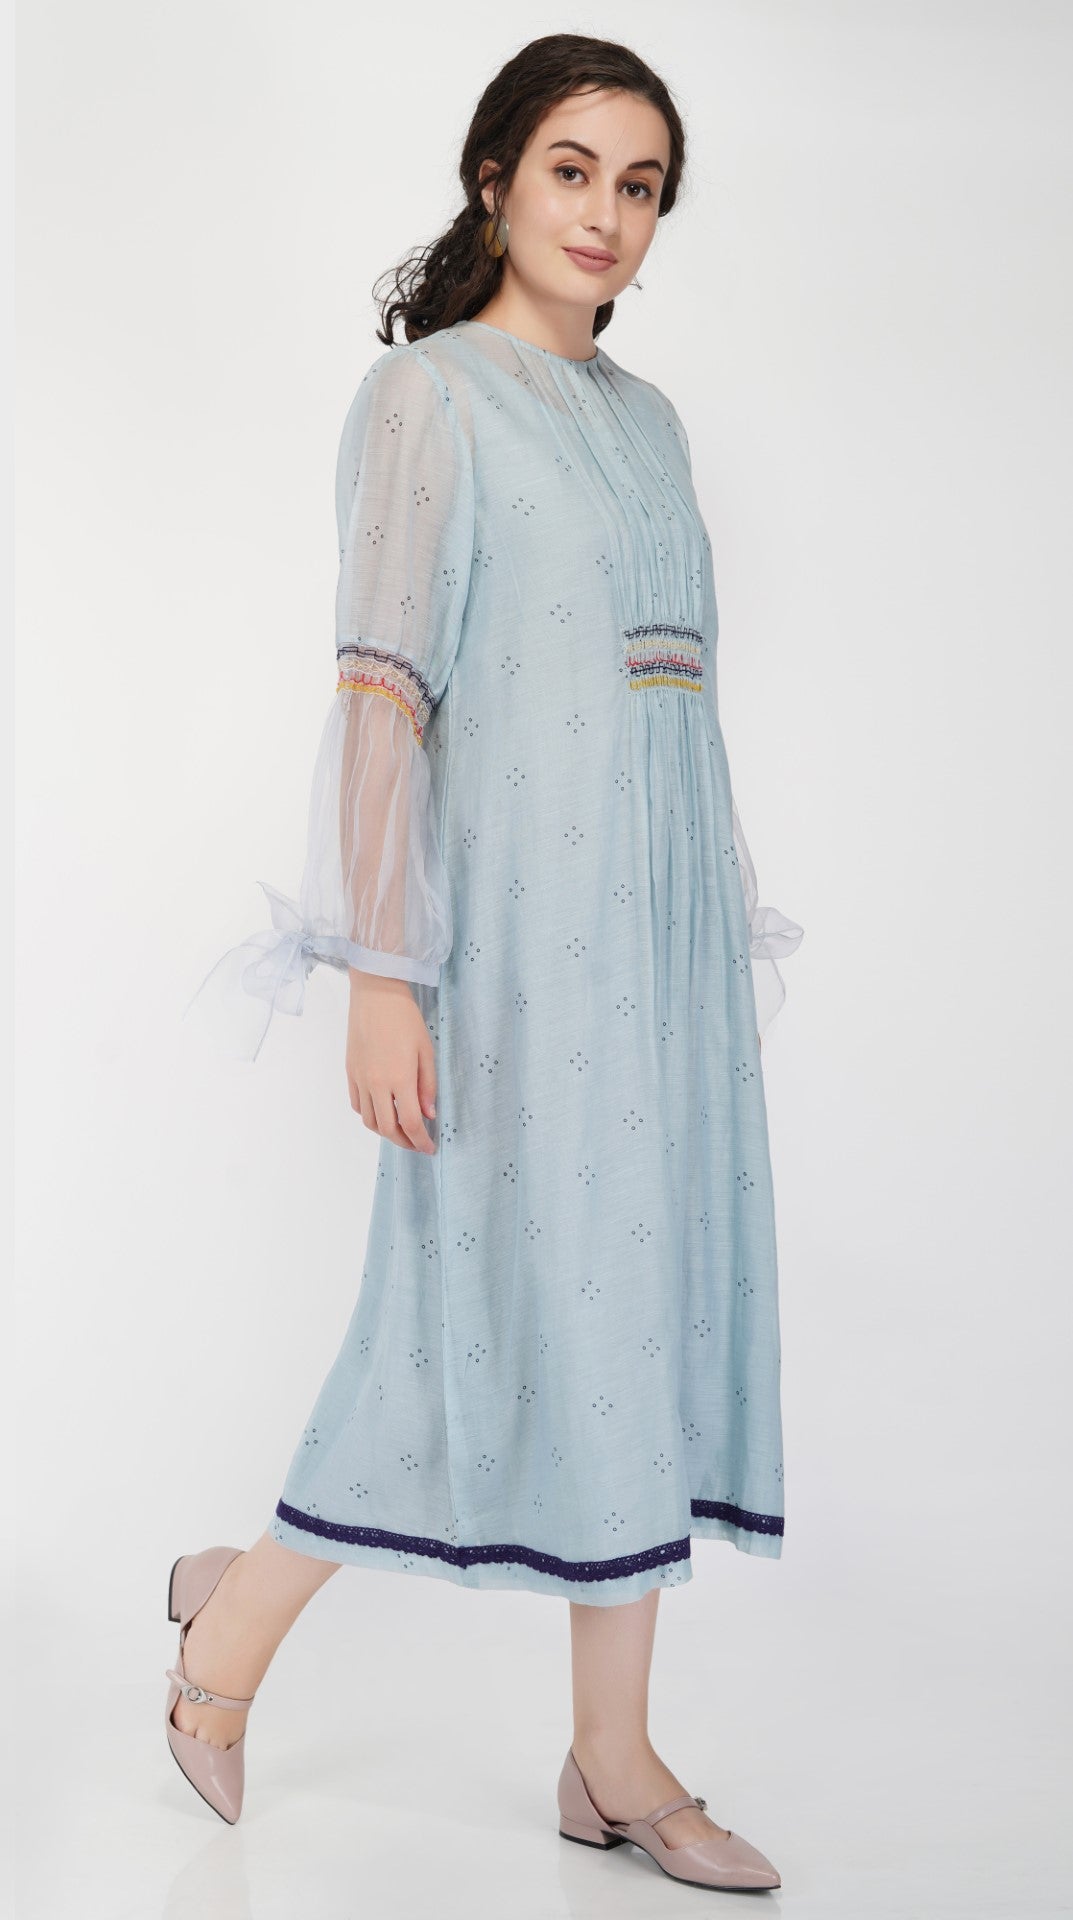 SAAWAN POWDER BLUE KAFTAN WITH SMOCKING EMBROIDERY WITH COTTON STRAIGHT PANTS